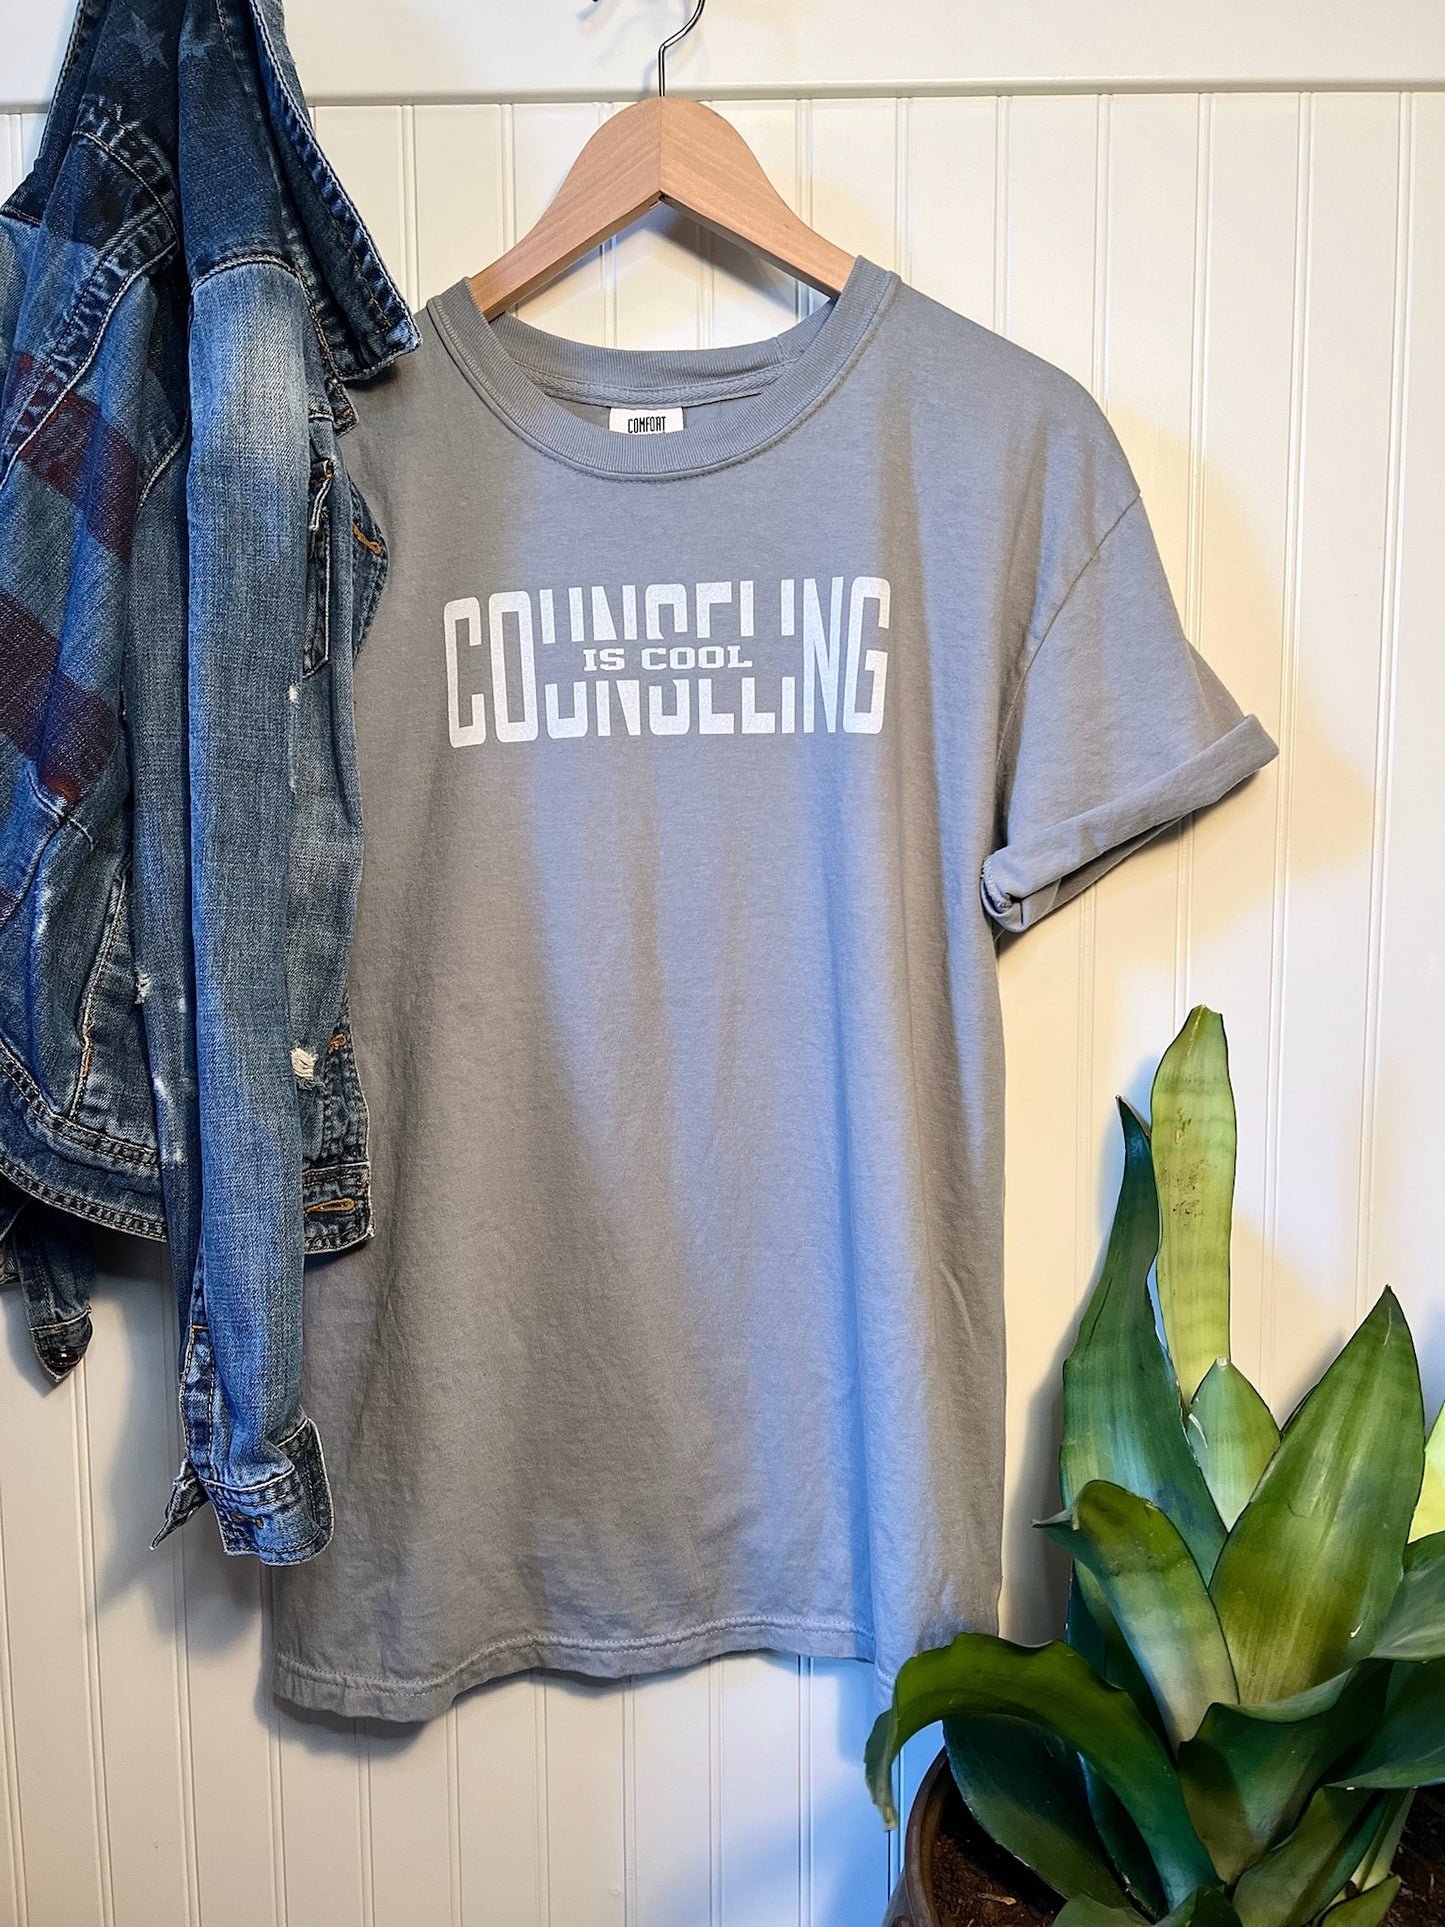 Counseling is Cool Tee - Original